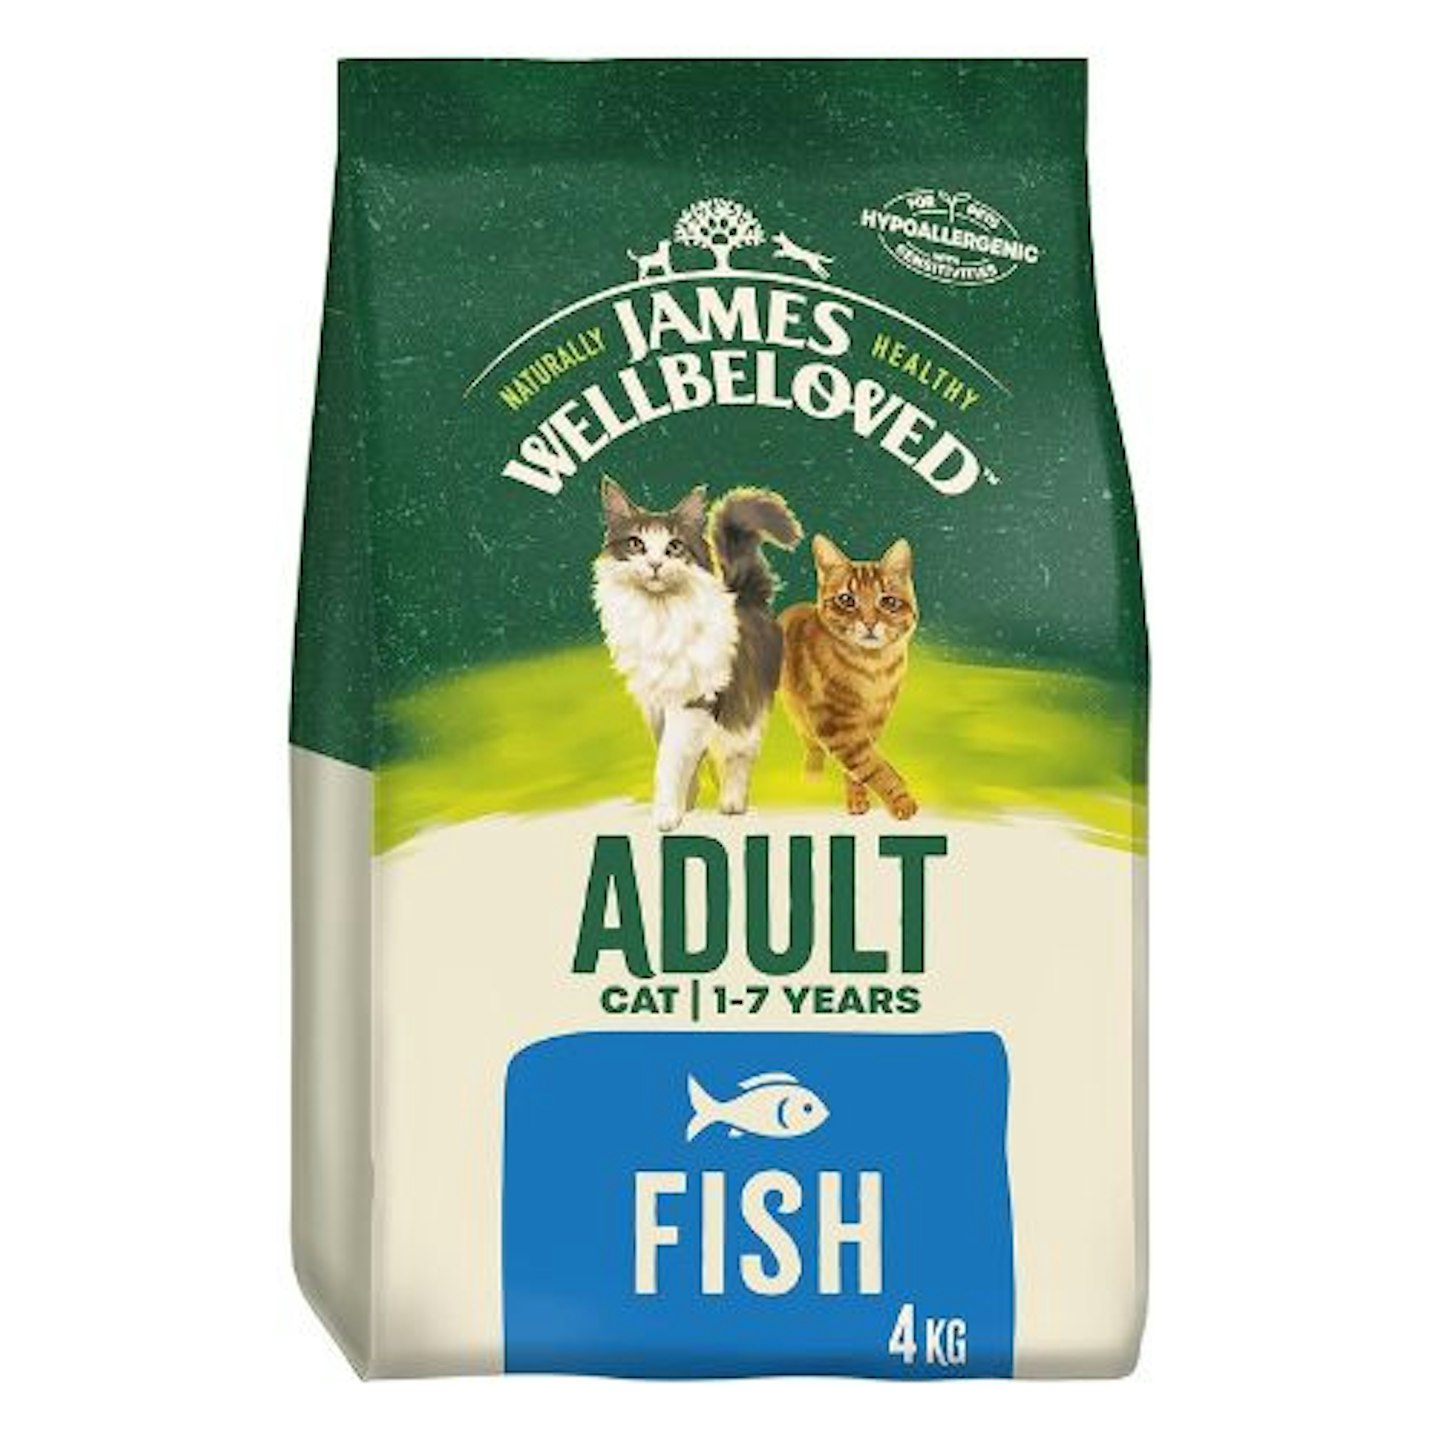 James Wellbeloved Complete Hypoallergenic Adult Dry Cat Food Made With 100% Natural Ingredients and One Source of Animal Protein (Fish), 4 kg